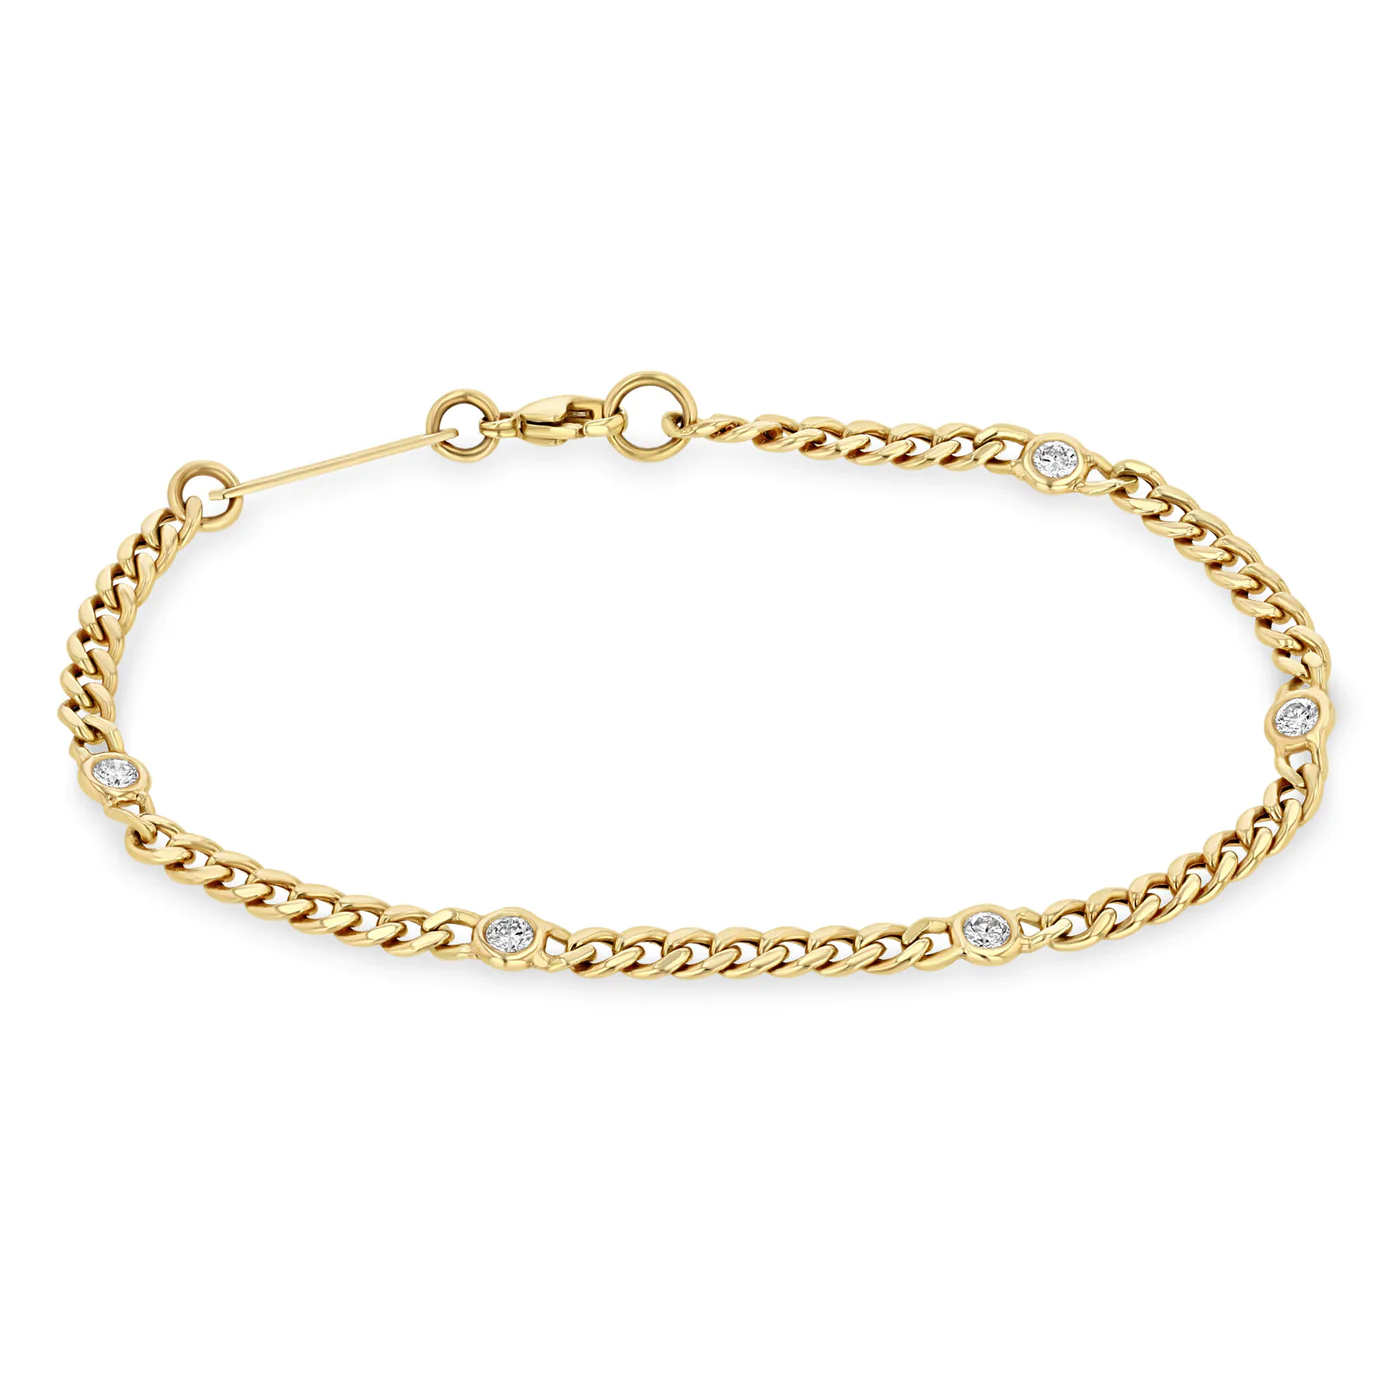 Small Curb Shain Bracelet With 5 Floating Diamonds